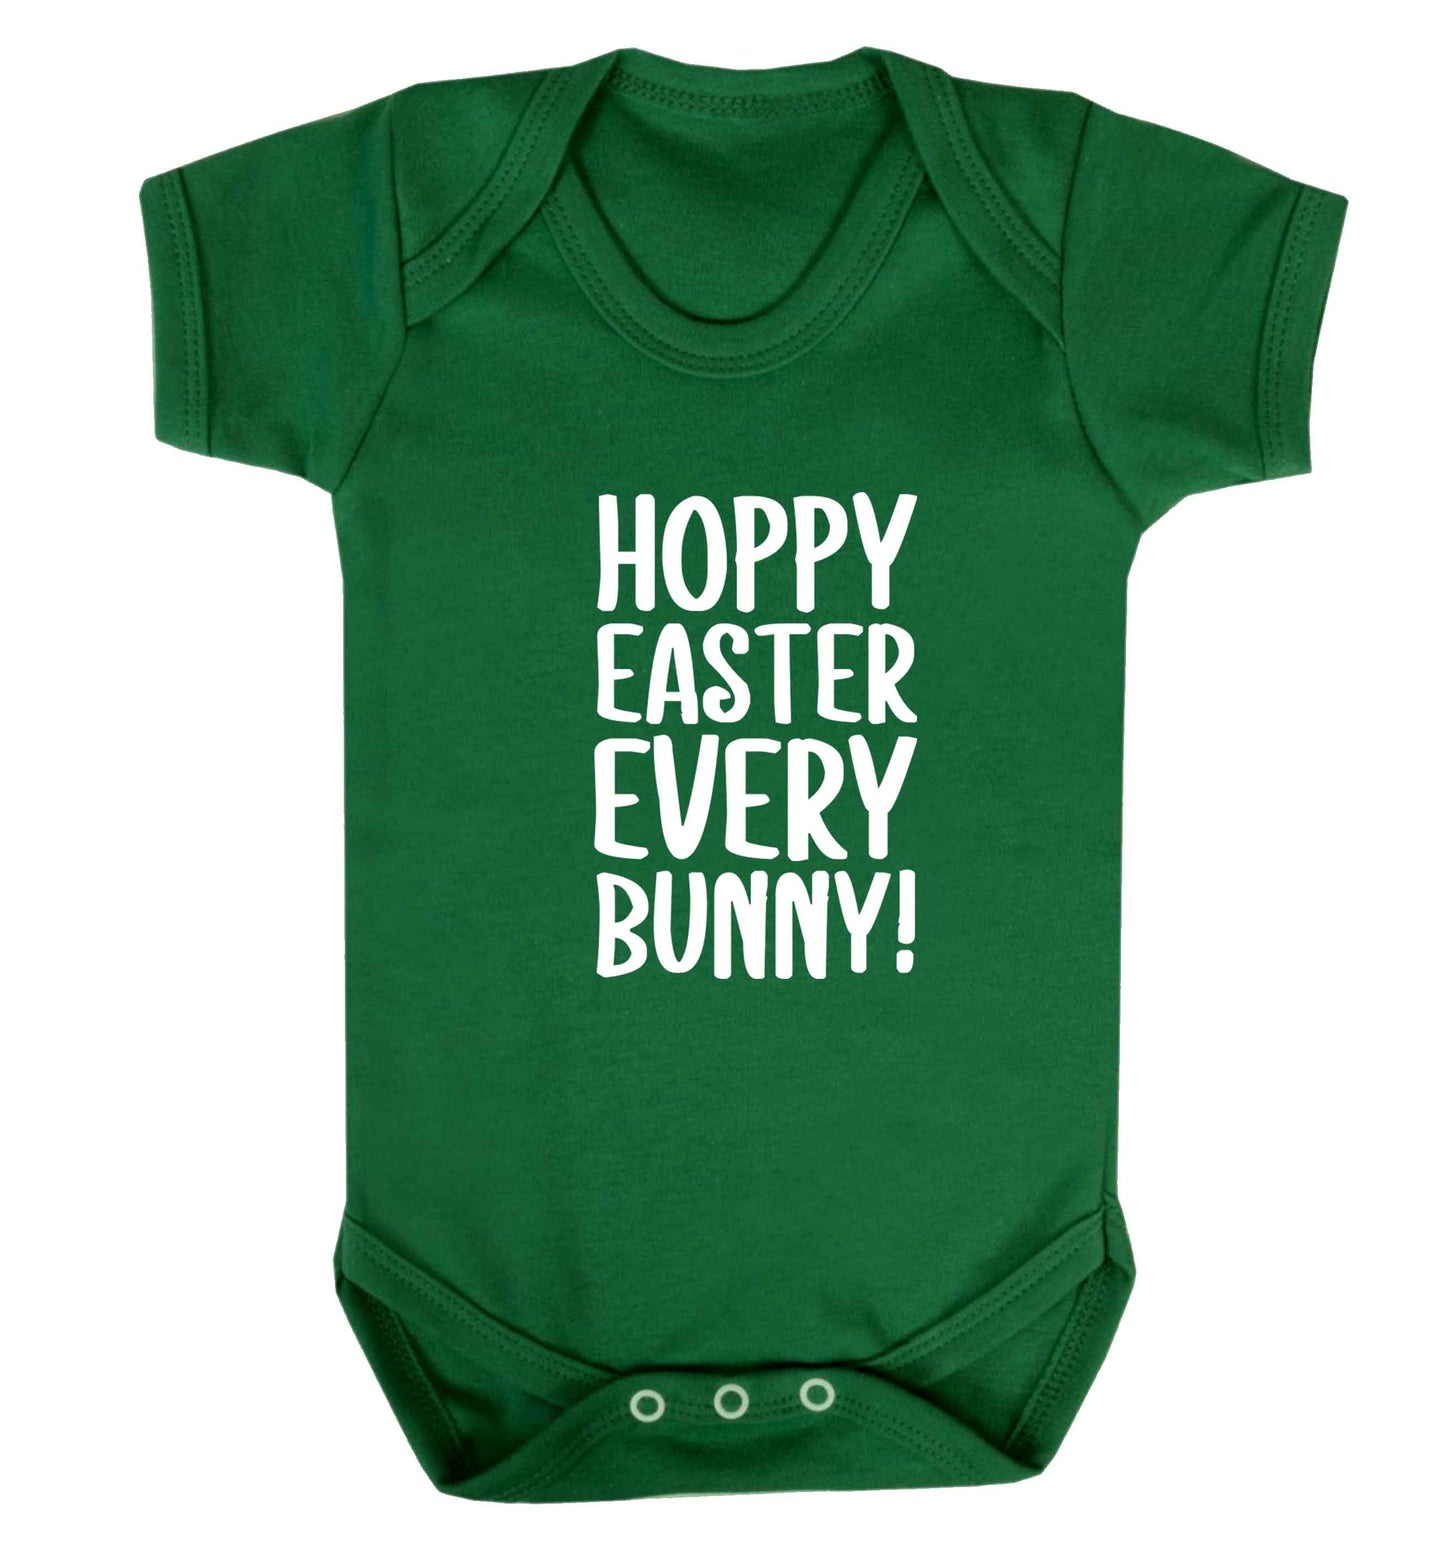 Hoppy Easter every bunny! baby vest green 18-24 months